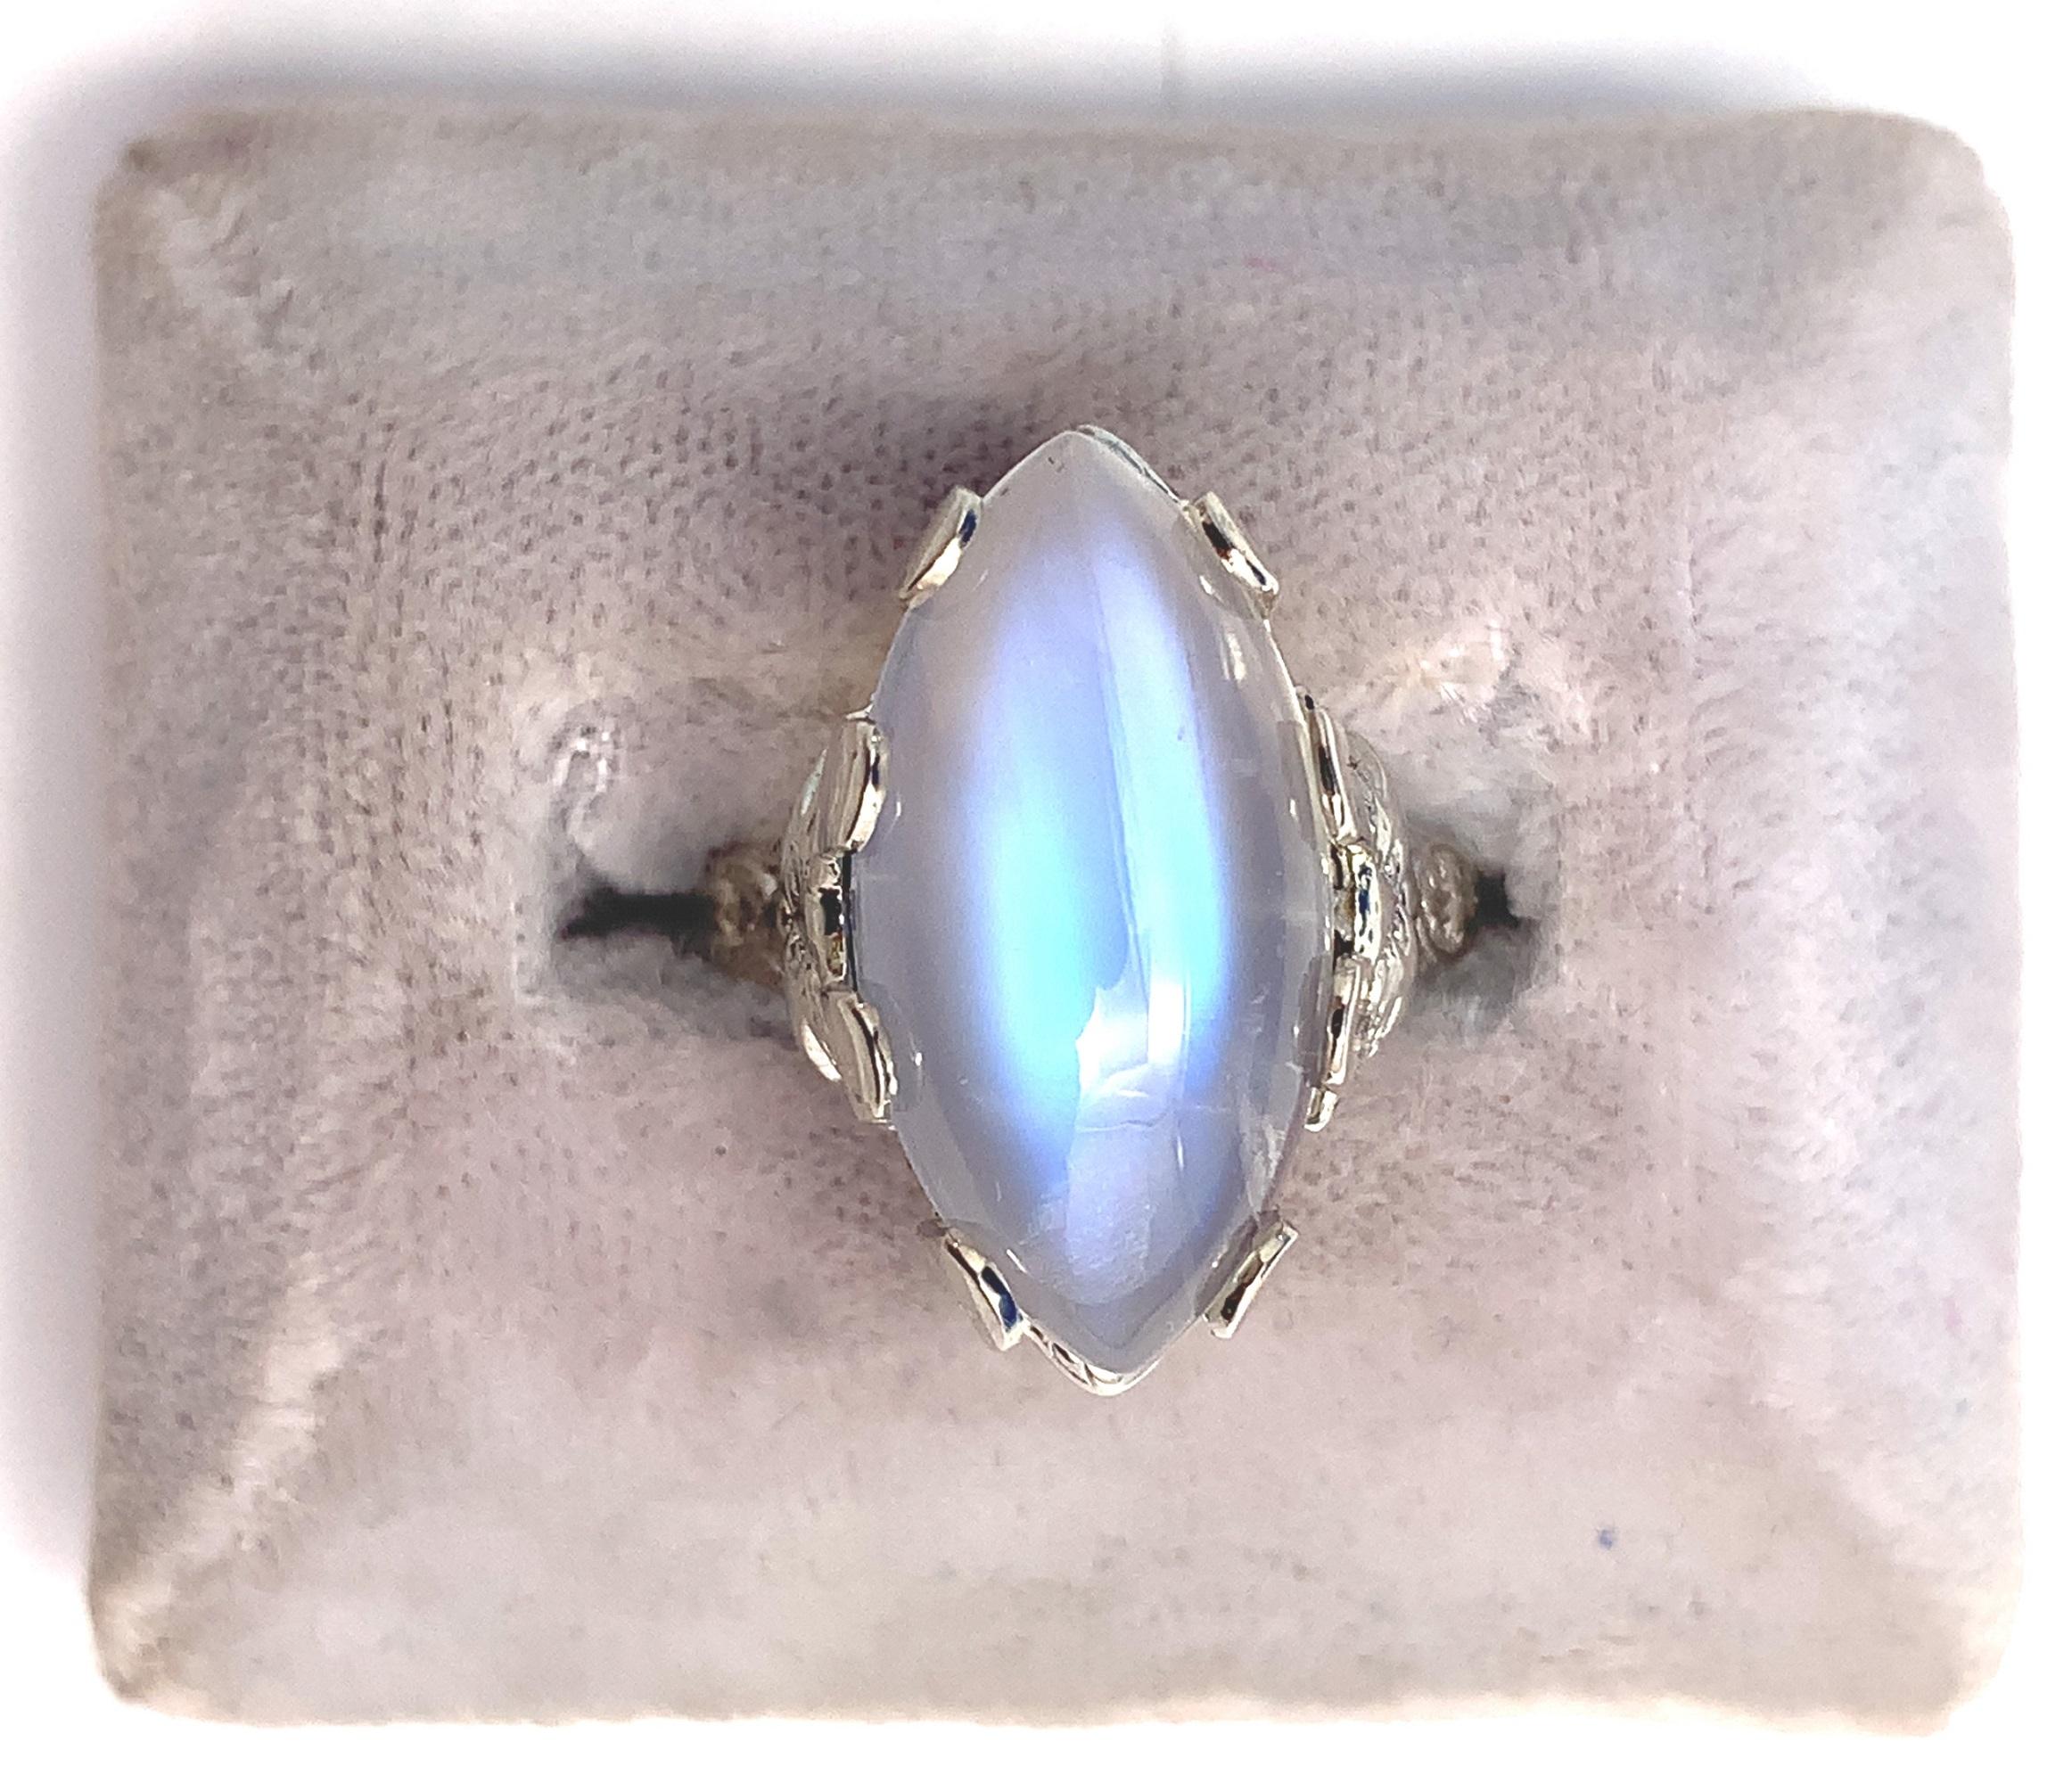 how rare is a moonstone